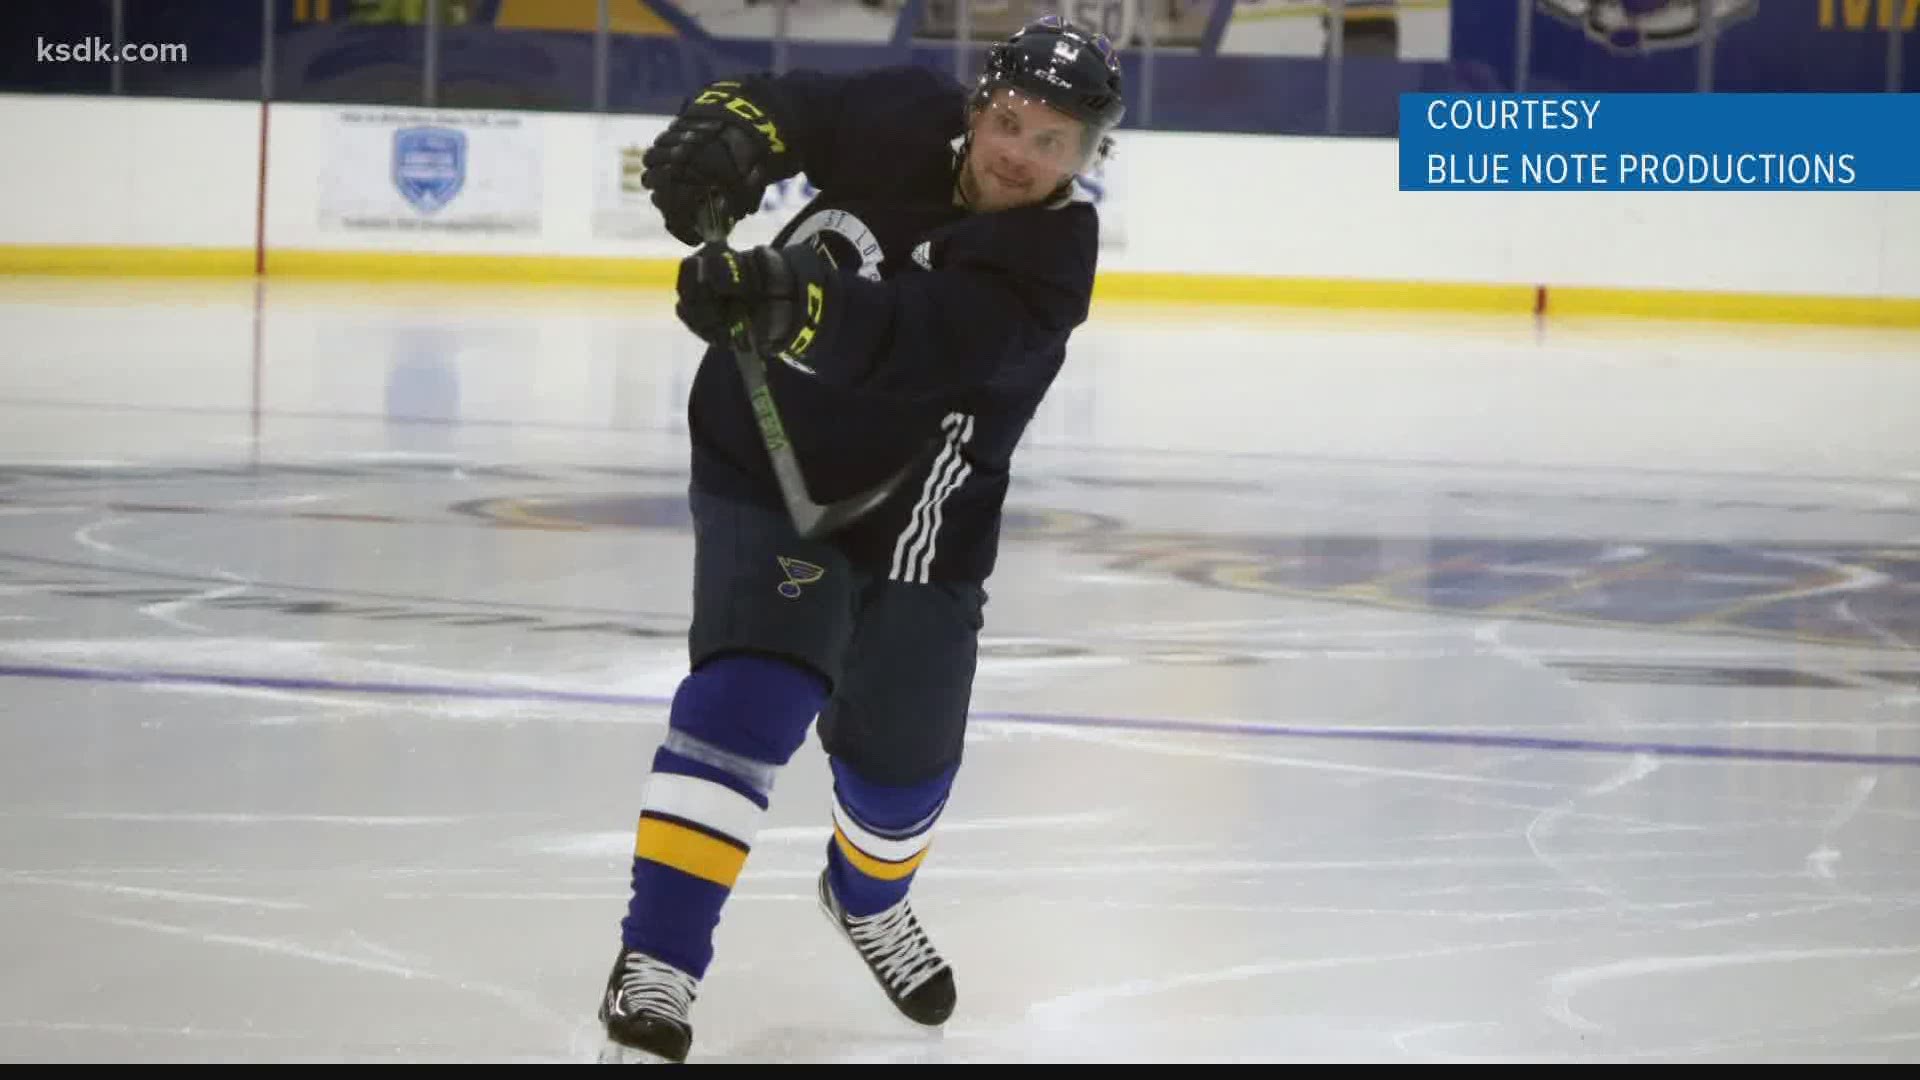 Tarasenko said he was nearing a return before the season was halted, but will be back when the sport returns.